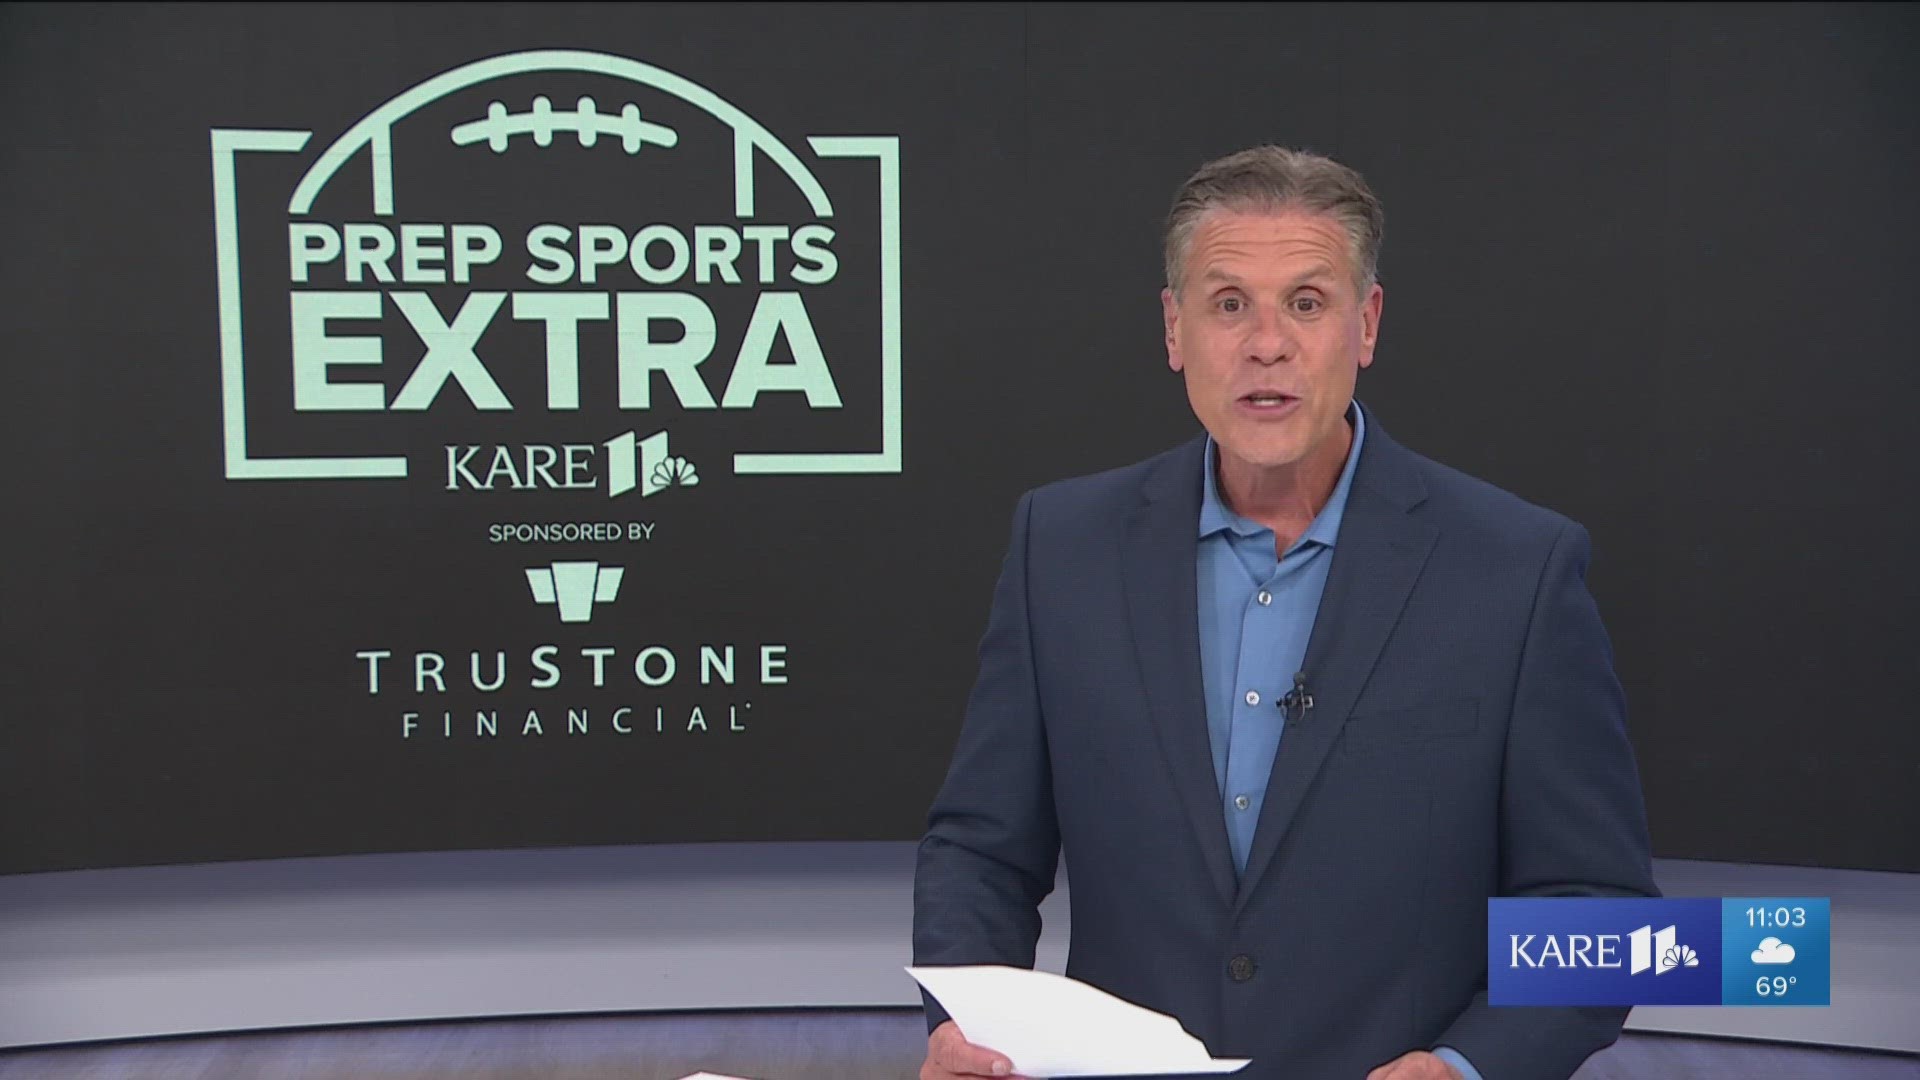 Randy Shaver is back for the 40th season of the KARE 11 Prep Sports Extra, where he’ll feature highlights from Friday night’s games.